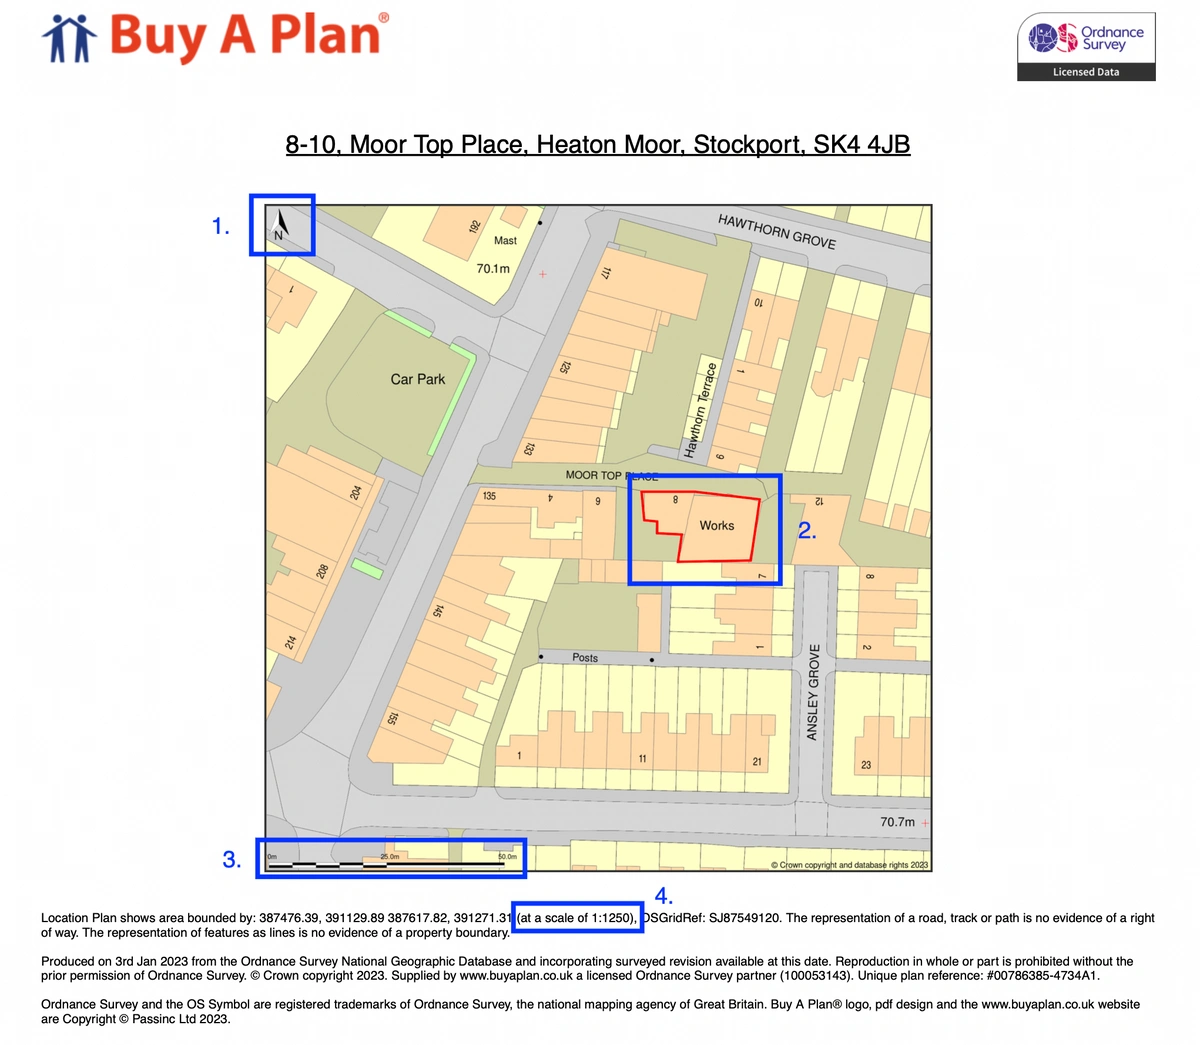 BuyAPlan®'s example of a planning map